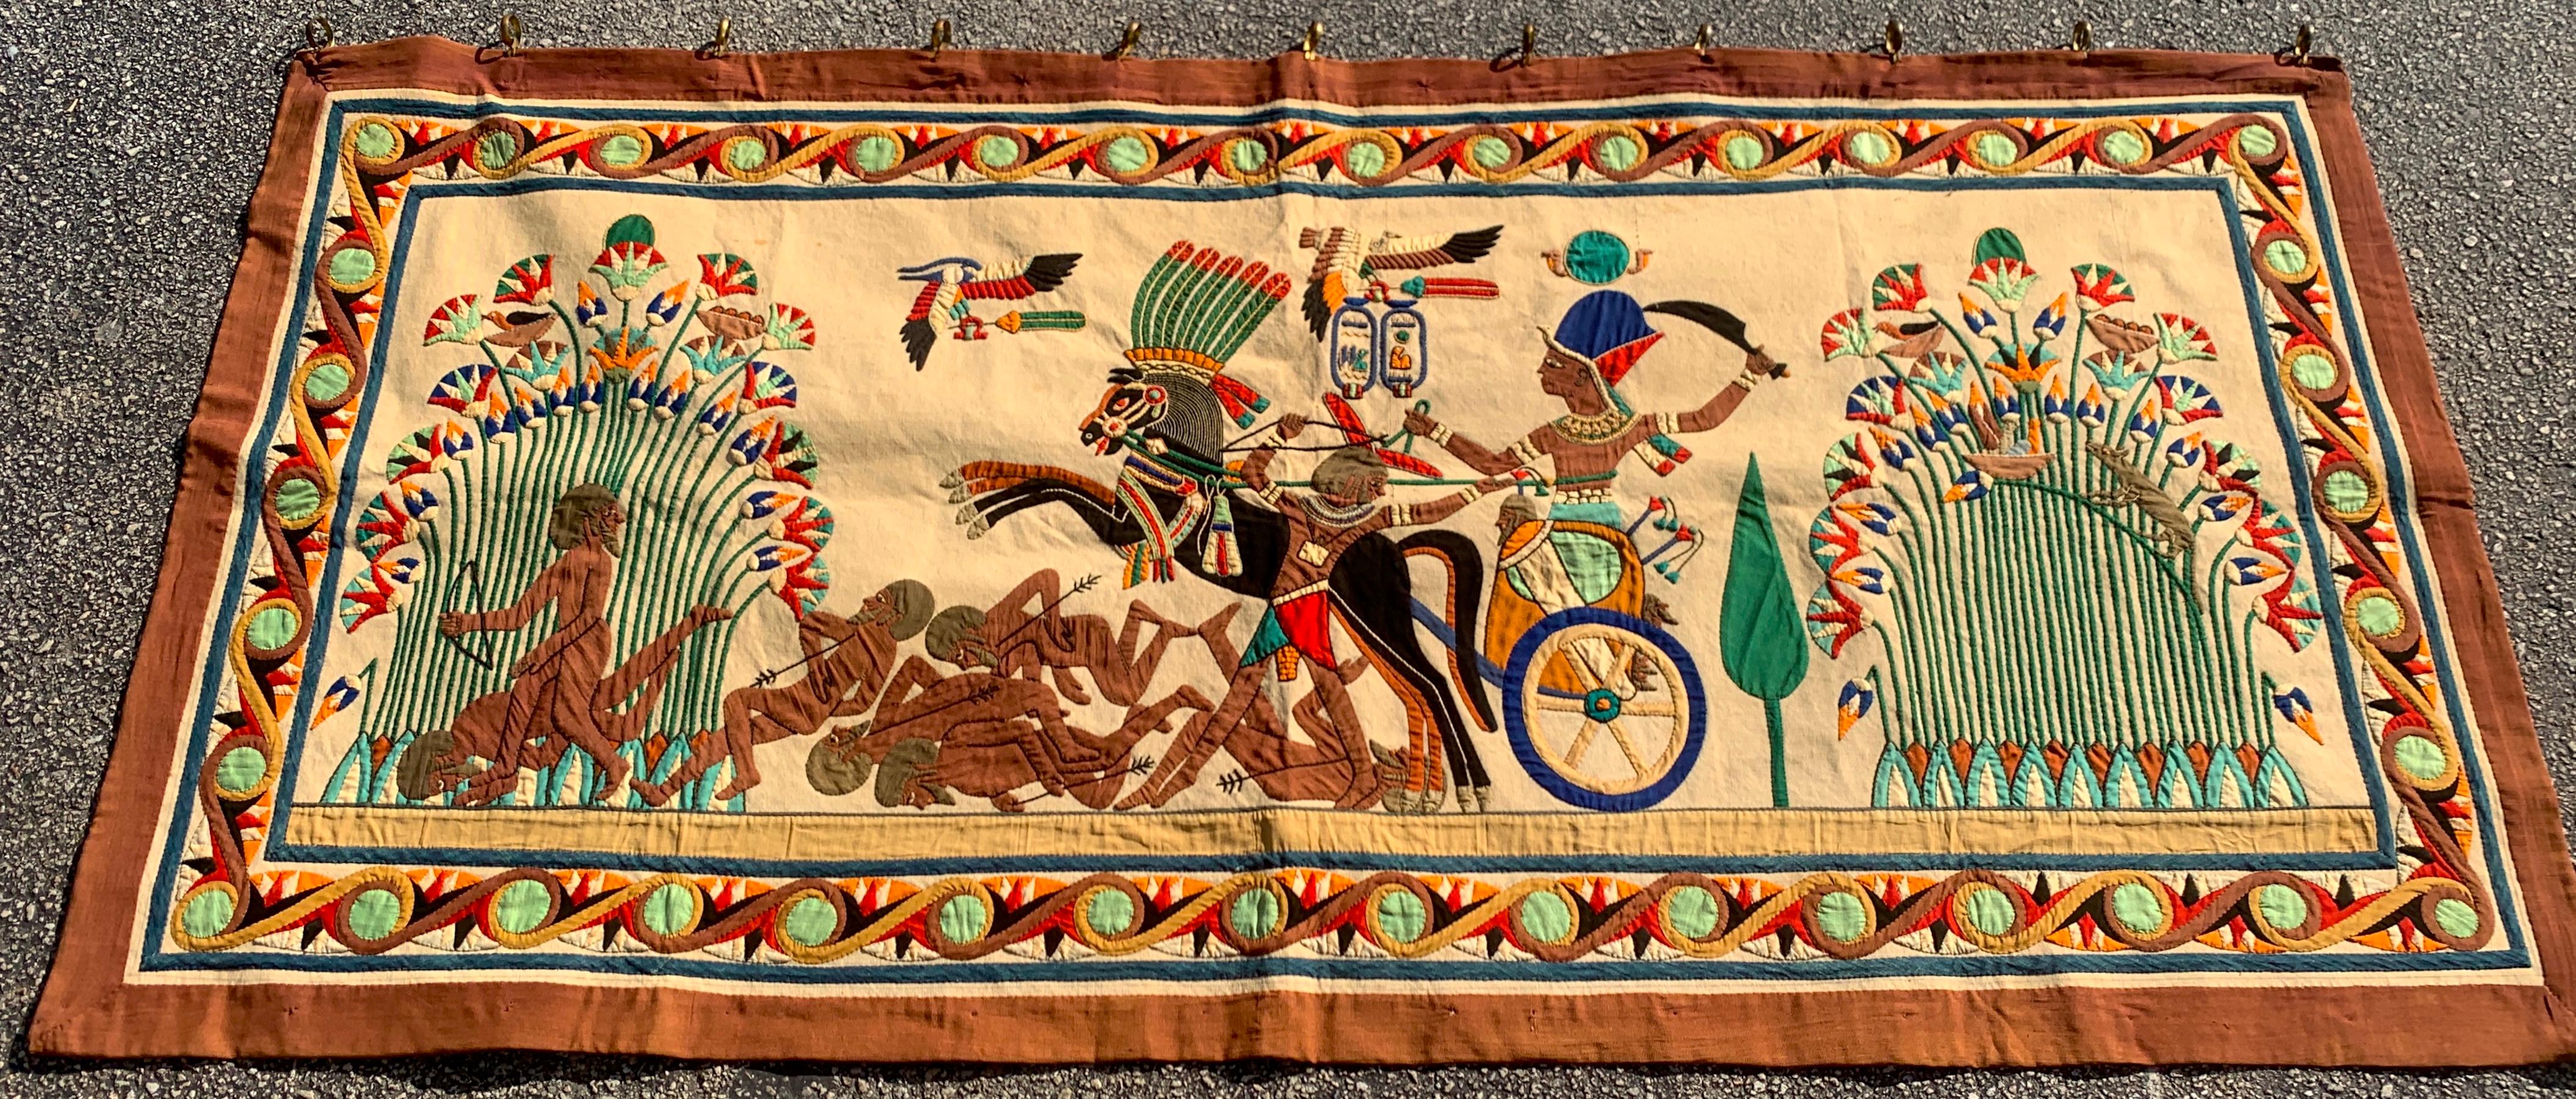 French Grand Tour Egyptian Tomb Tapestry, circa 1925
Intricate and well executed, in vibrant vegetable dyed cotton appliques.
Depicting Egyptian Figures, gods, hieroglyphics in landscape.